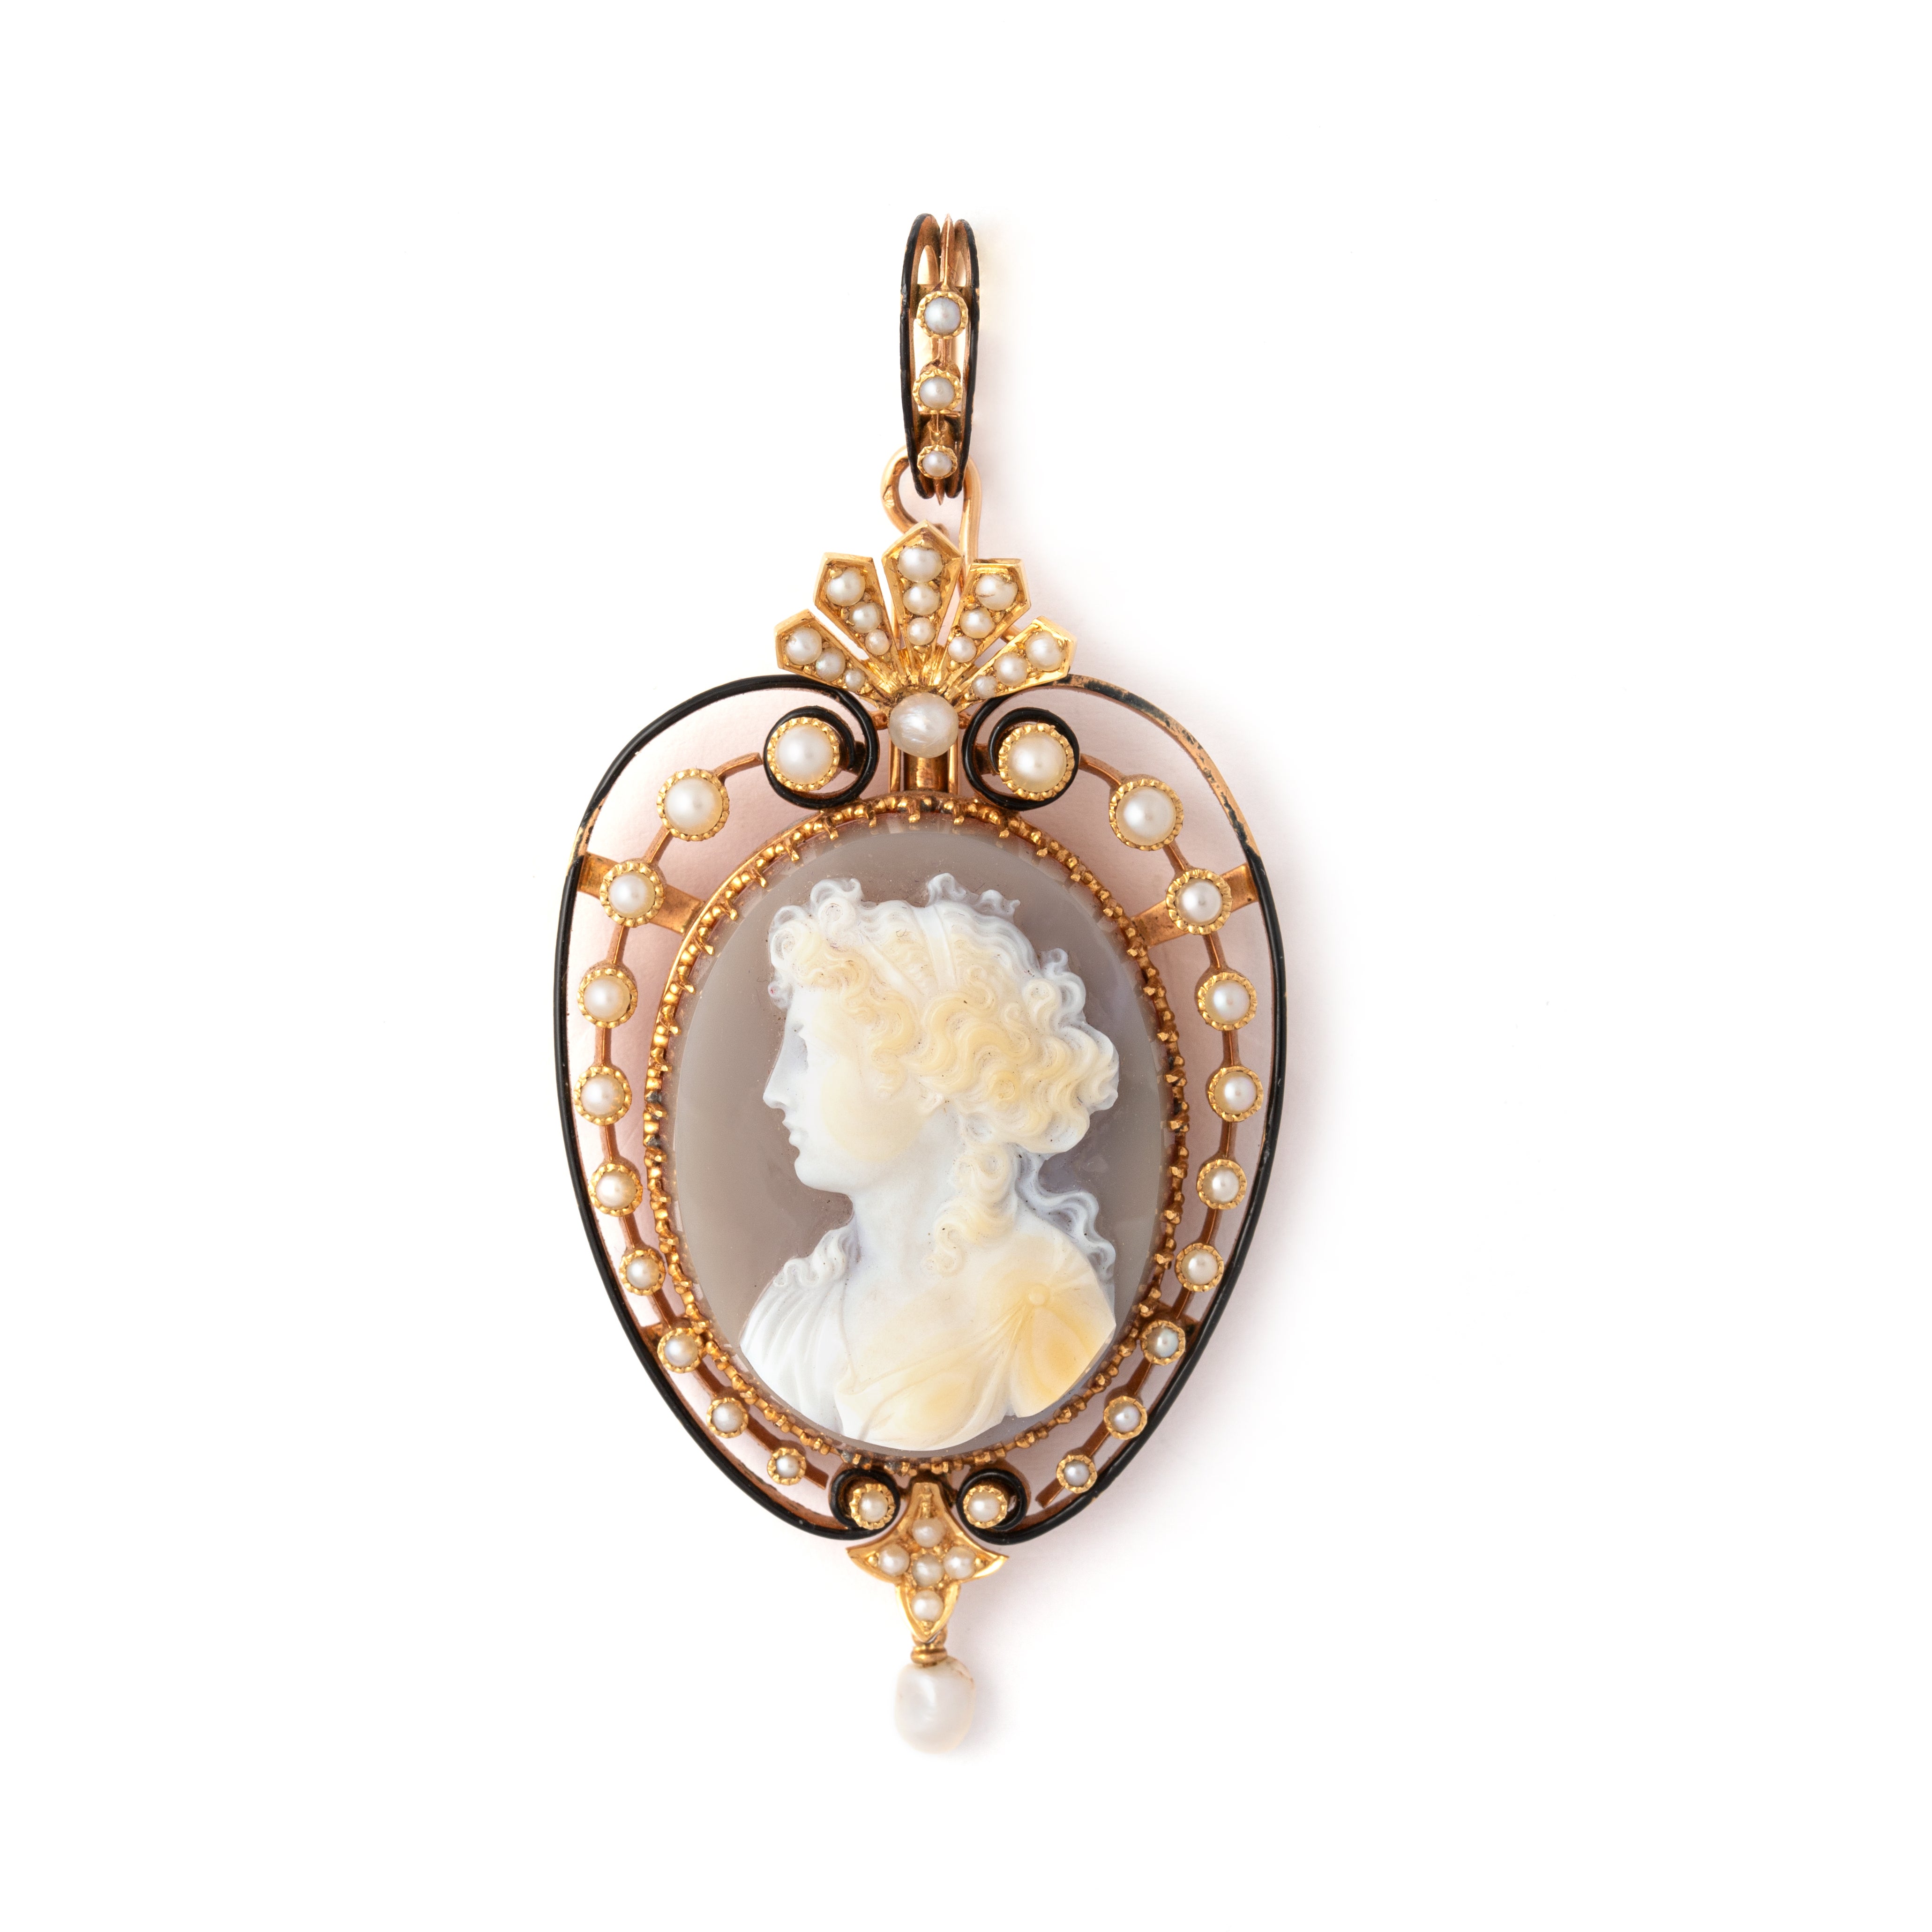 Antique Cameo Gold Pearl Set. Early 20th Century.
Original antique box.

Pendent:
Weight: 31.93 grams.
Total length: approx. 8.30 centimeters / 3.27 inches.
Total width: approx. 3.80 centimeters / 1.50 inches.

Earrings: 
Total weight 20.25